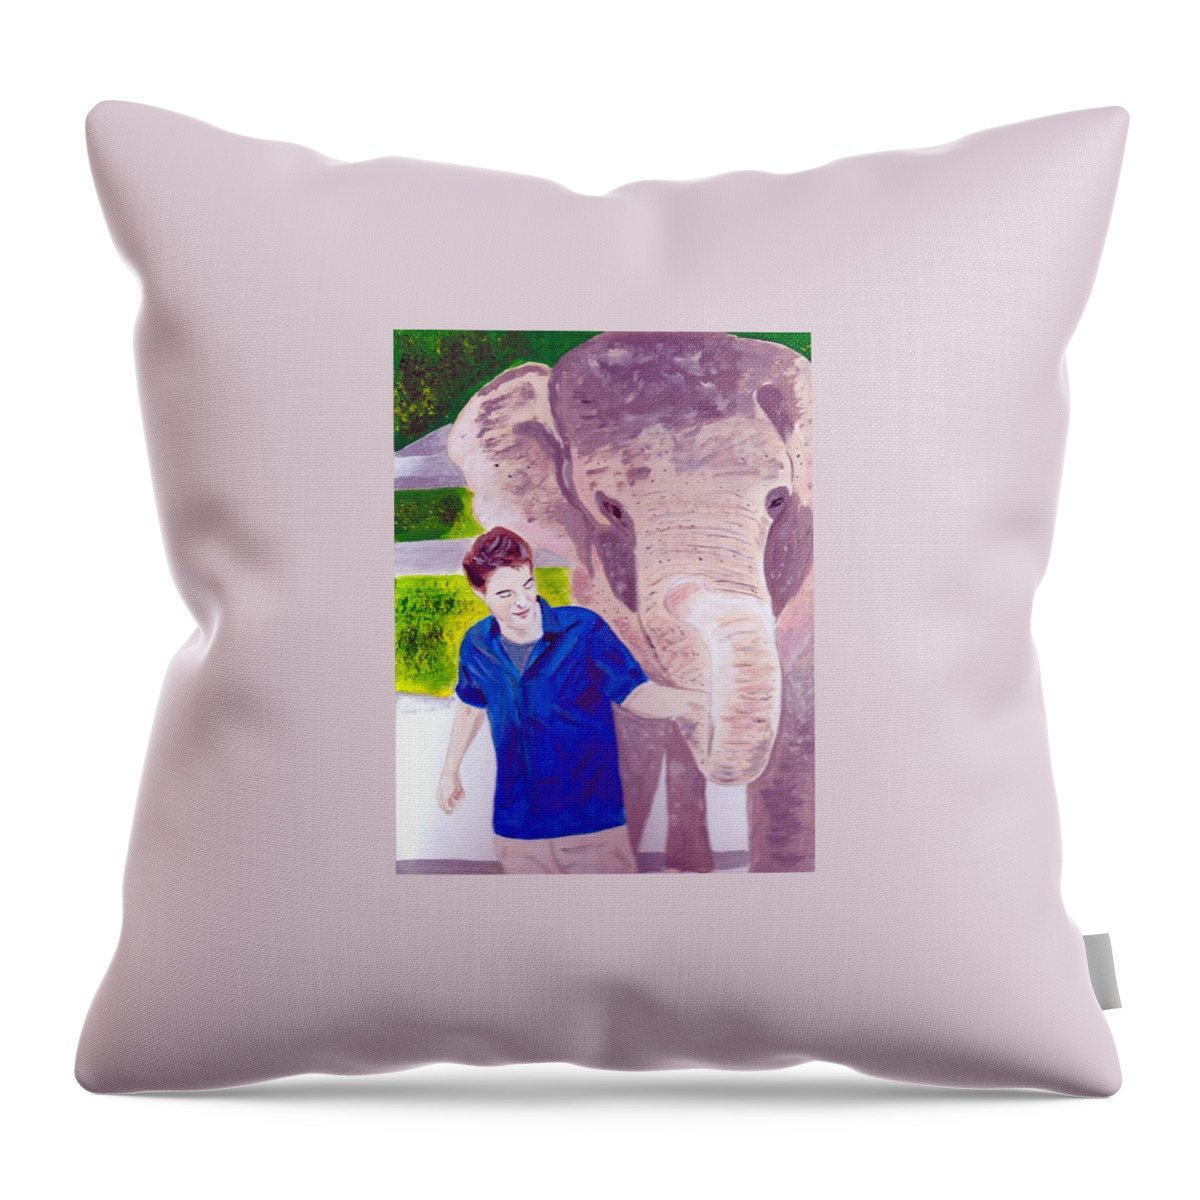 Robert Pattinson Famous Faces Actor Movies Filmstar Animals People Painting In Acrylic Throw Pillow featuring the painting Robert Pattinson with Tai by Audrey Pollitt